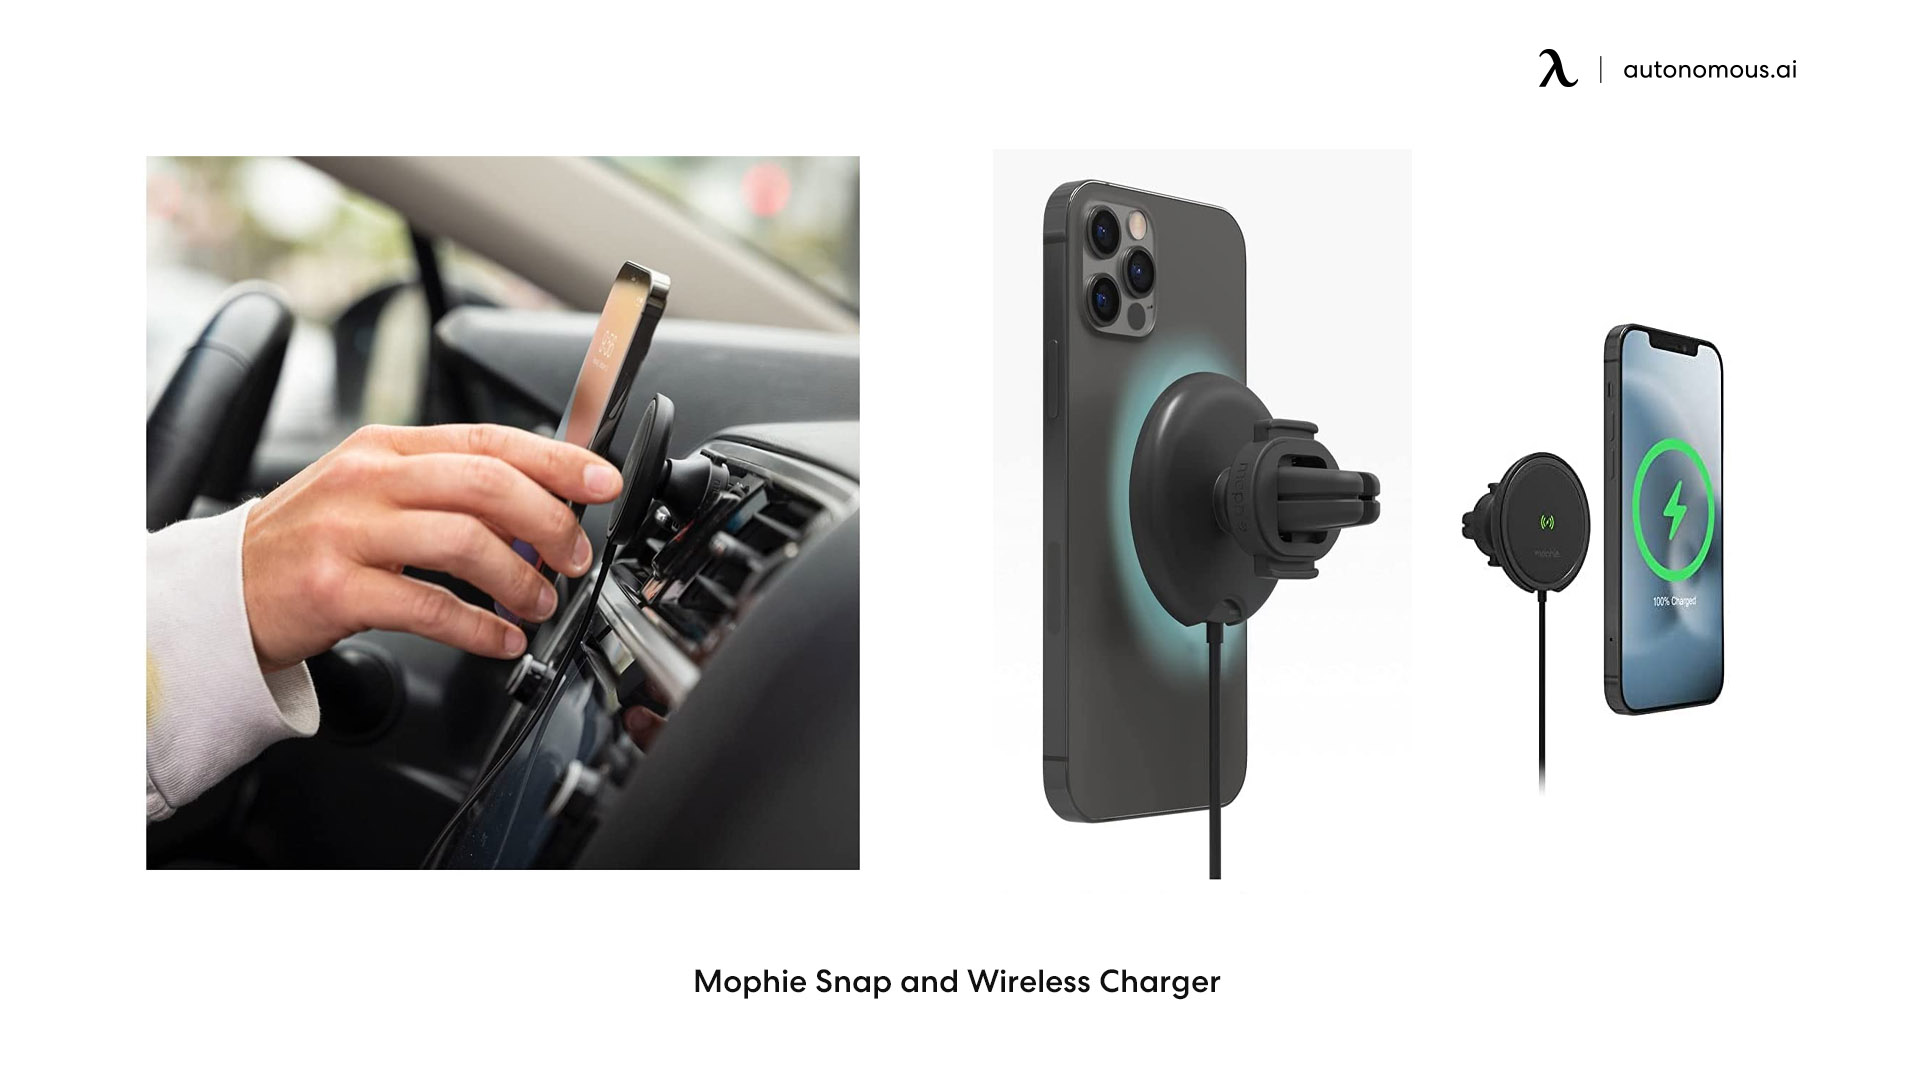 Mophie Snap and Wireless Charger